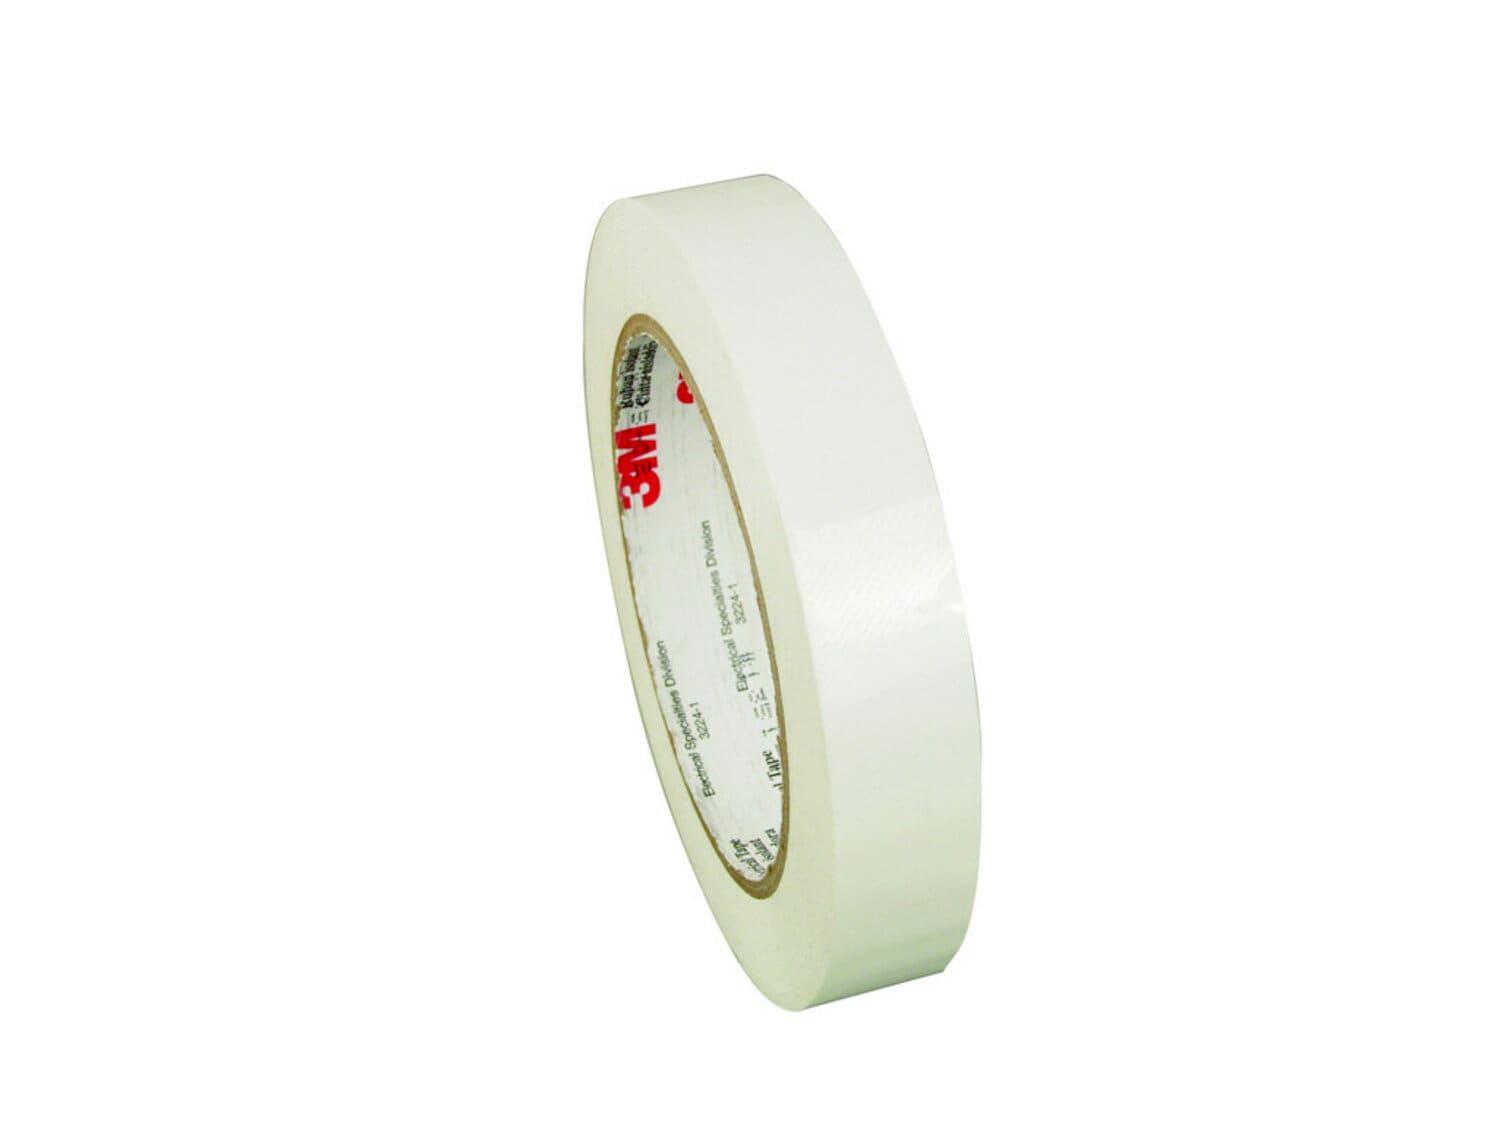 7010397220 - 3M Polyester Film Electrical Tape 1350F-1, White, 3/4 in x 72 yd, 3-in
paper core, Log roll, 16 Rolls/Case